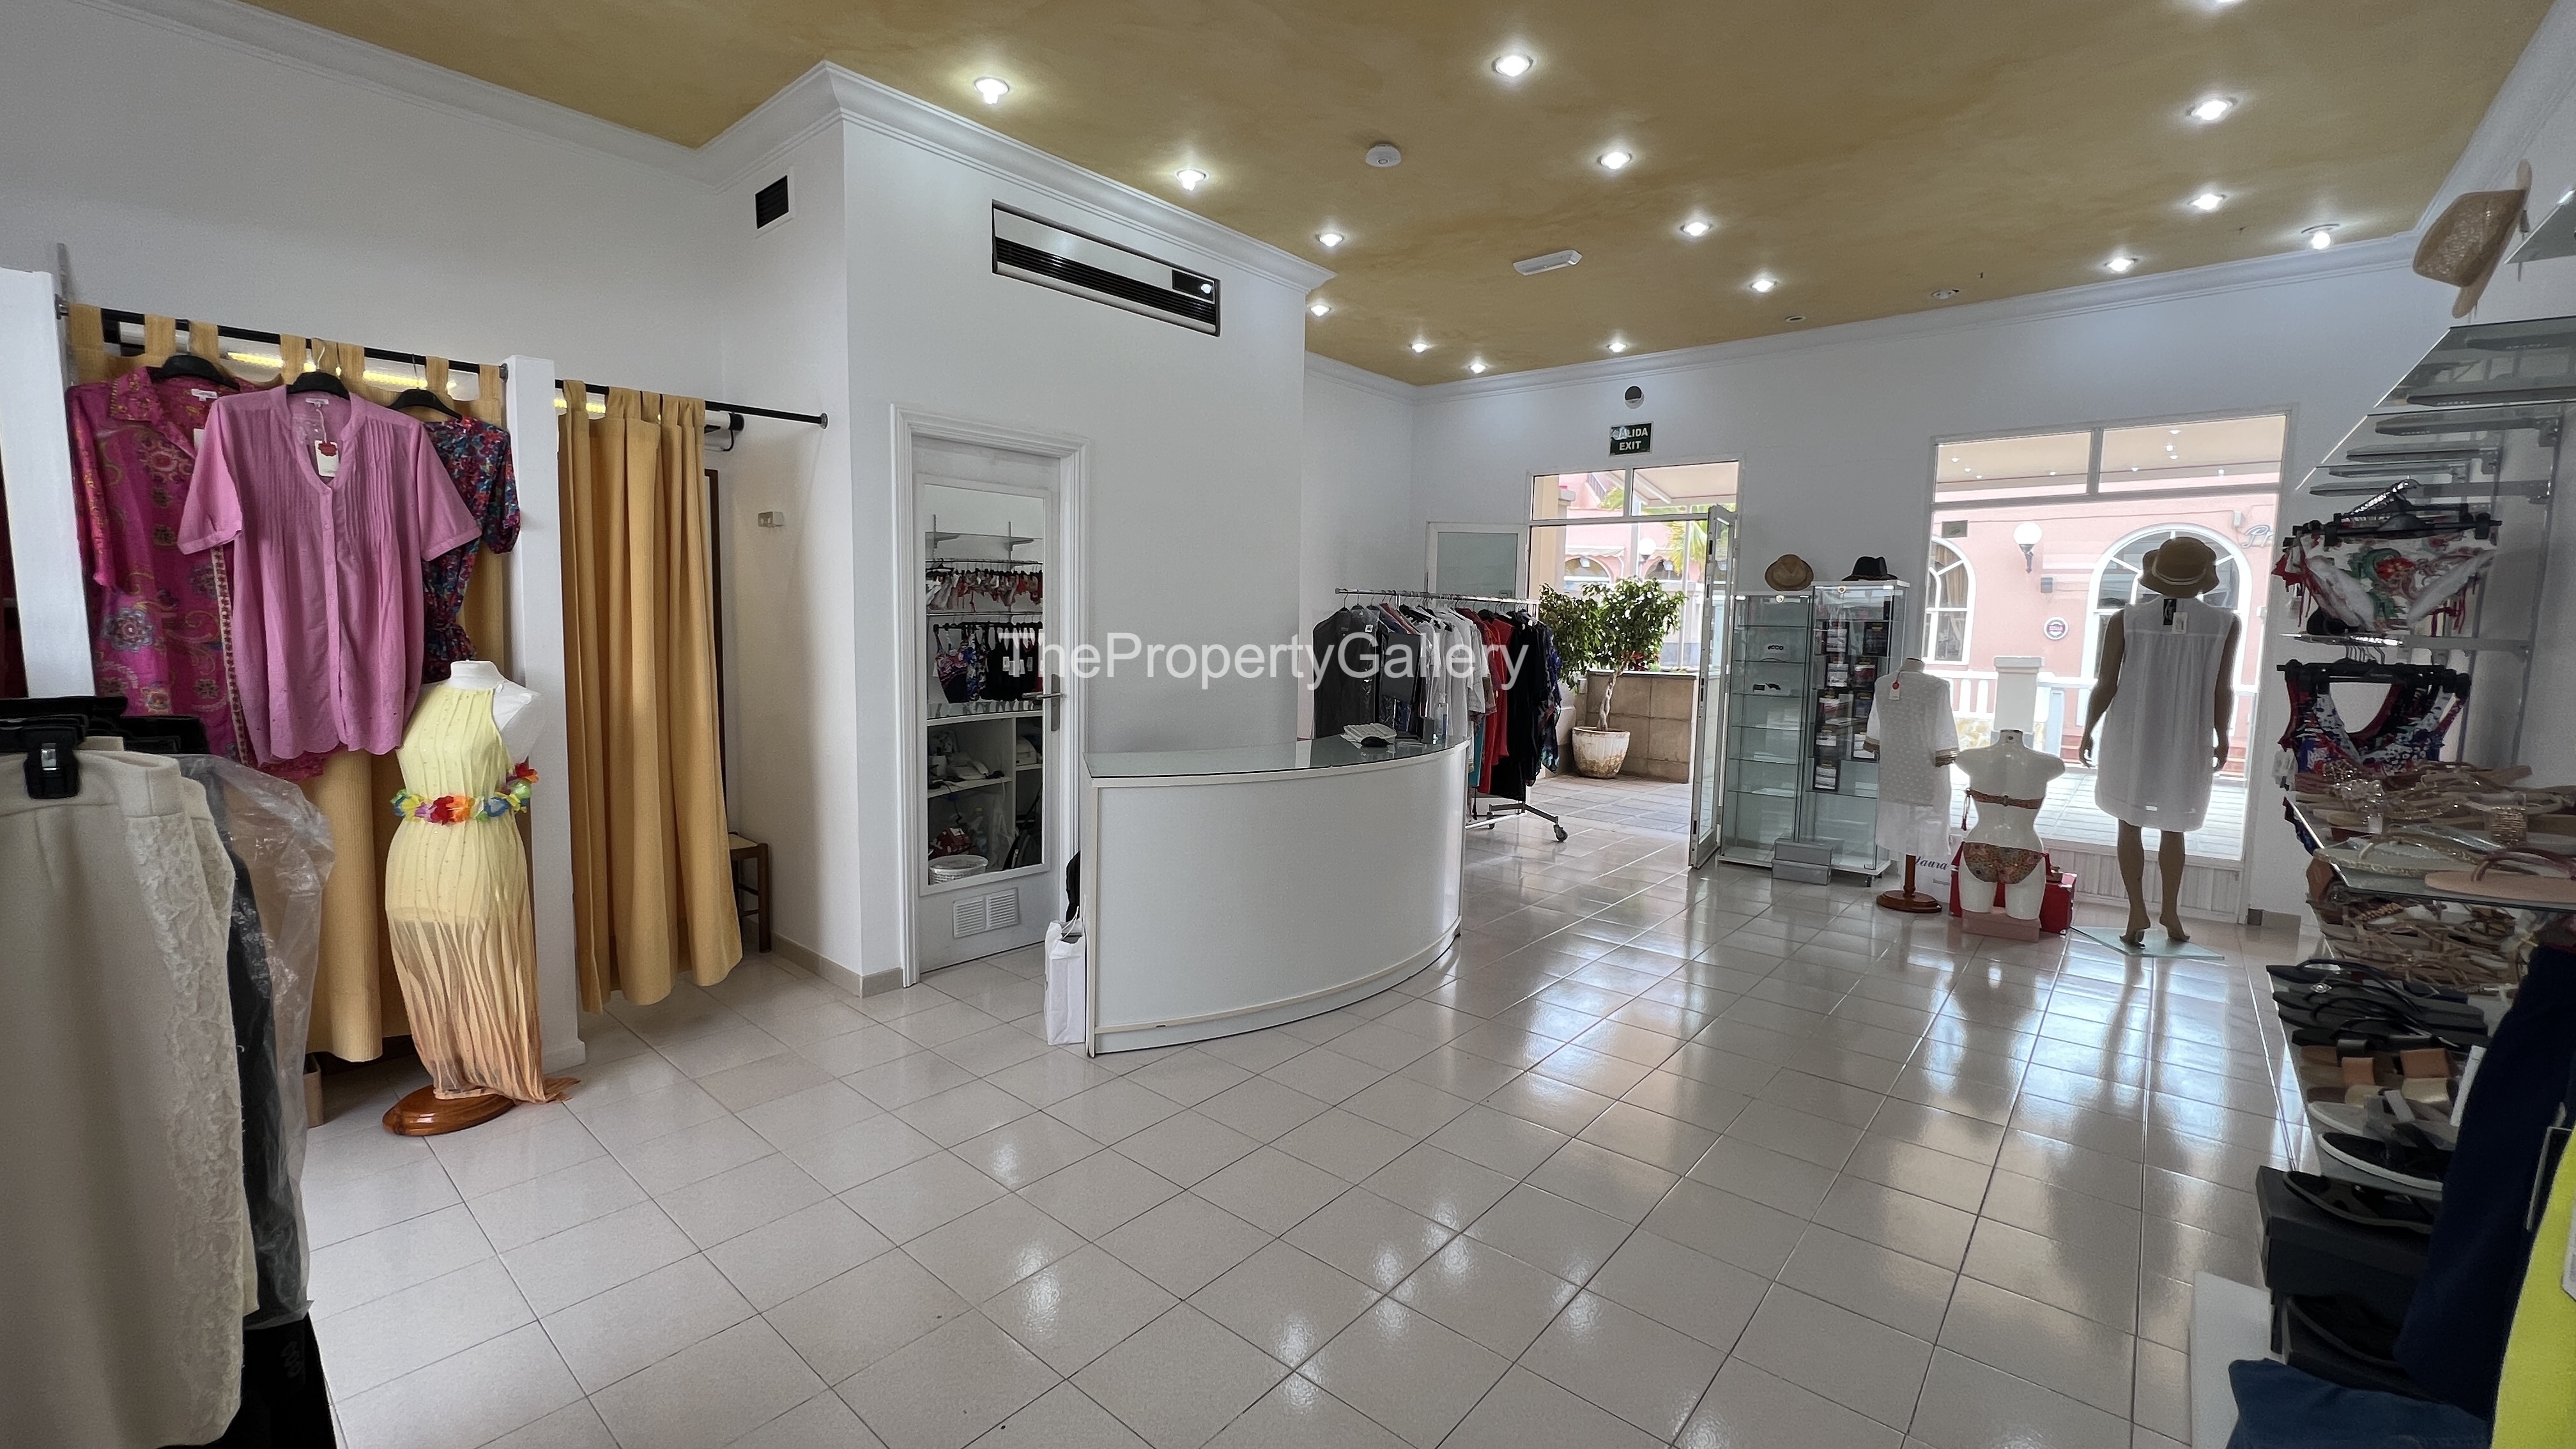 Commercial property in Playa Fañabé marketed by The Property Gallery